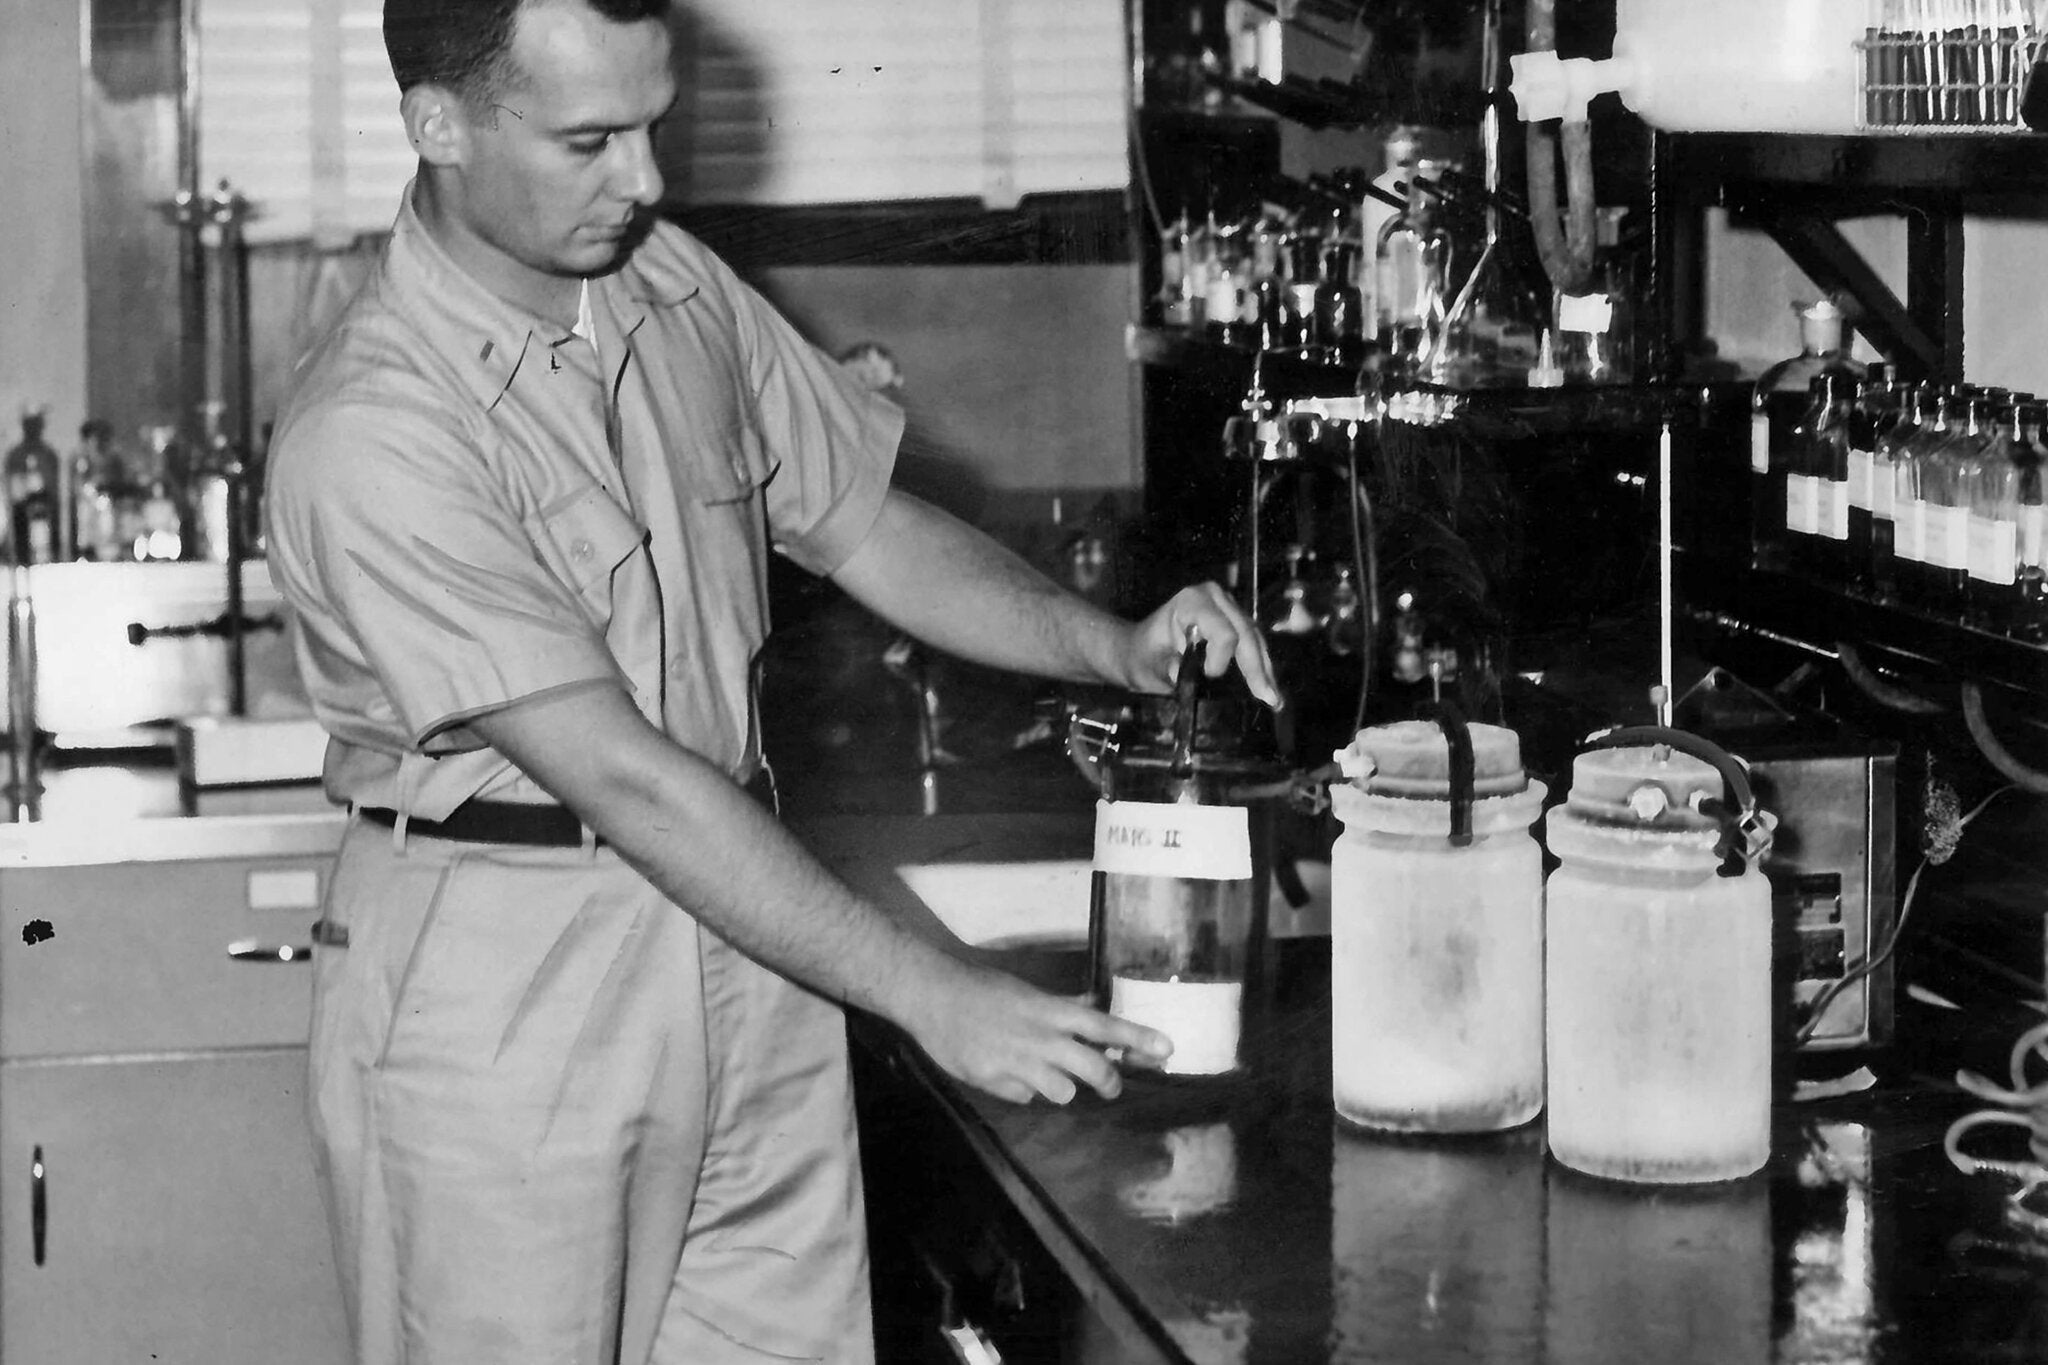 An early air force Mars Jar tended to in 1957